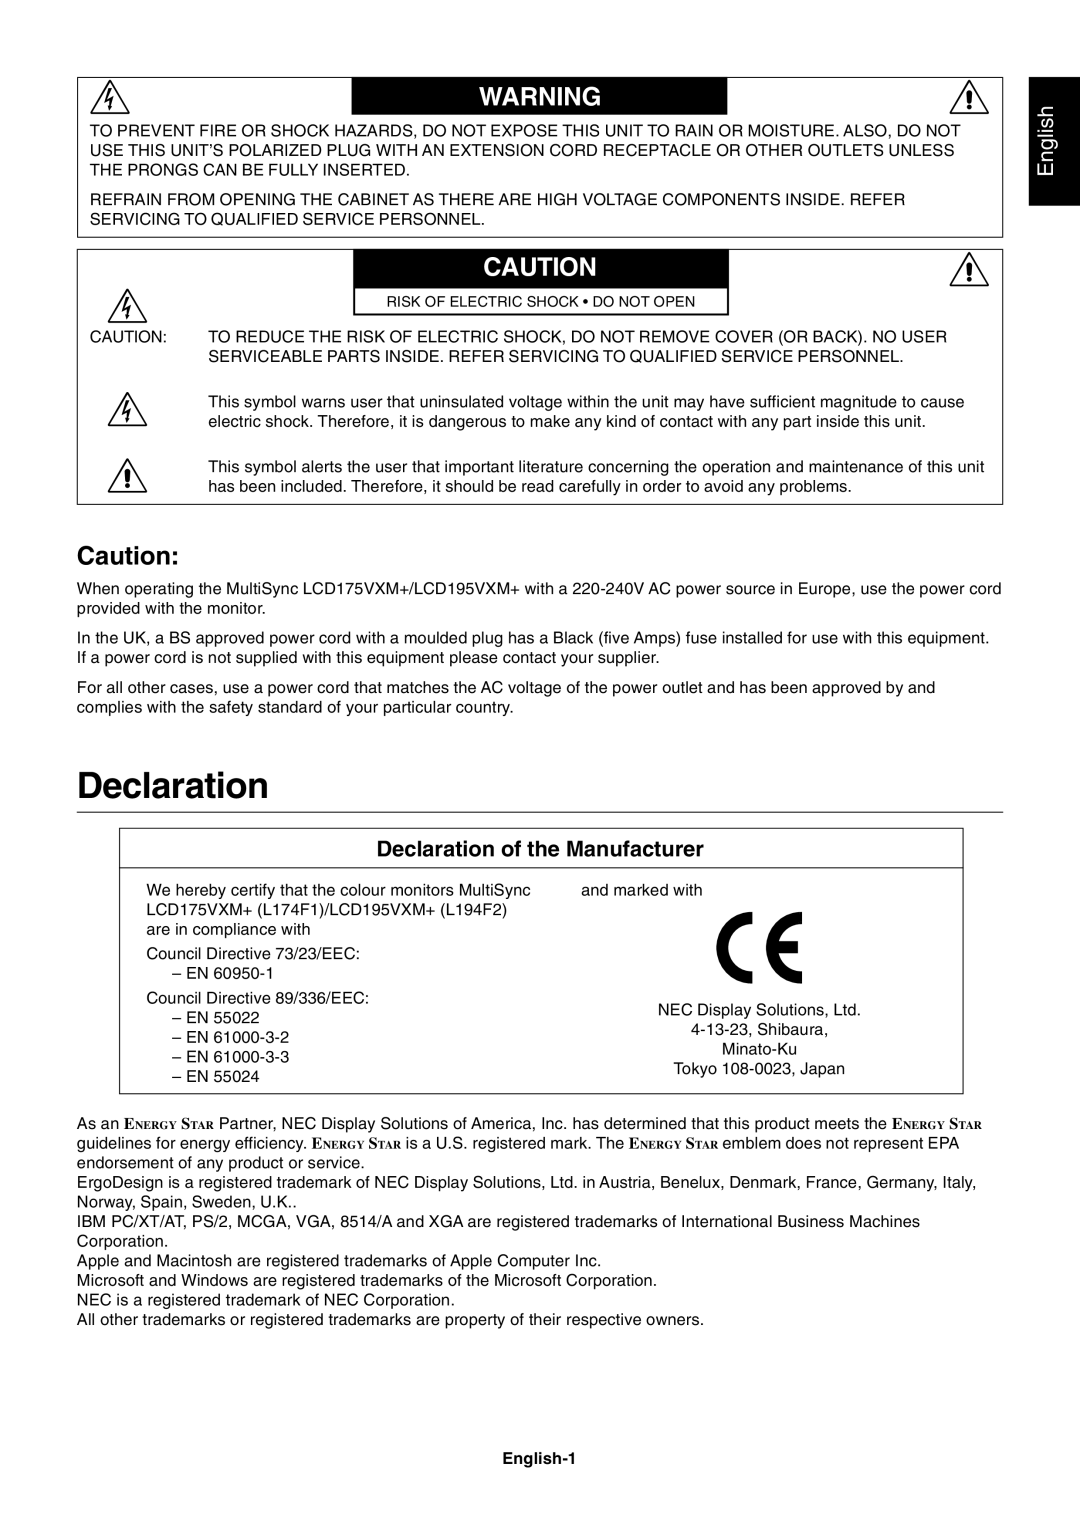 NEC LCD175VXM+ user manual English, Declaration of the Manufacturer 